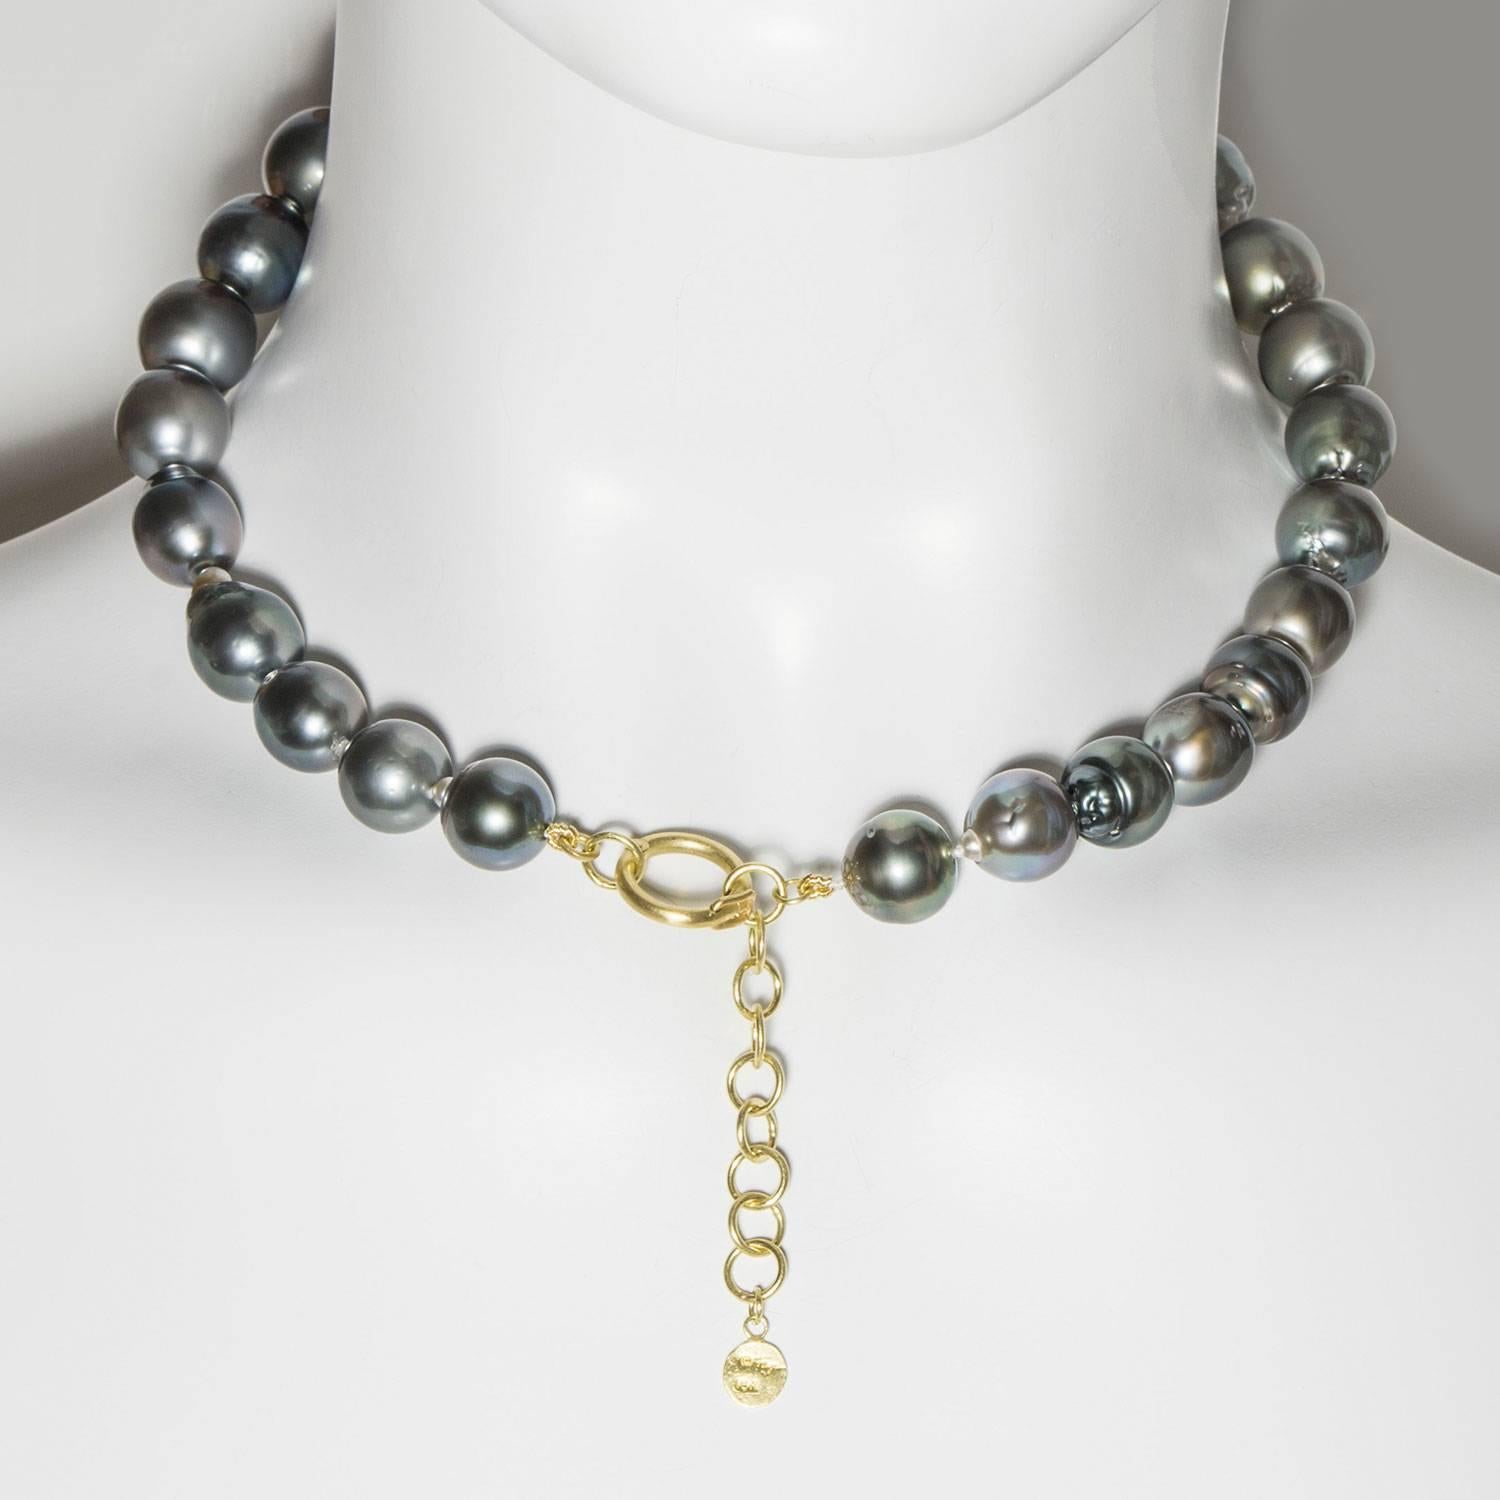 Faye Kim 18k Gold Black Tahitian Baroque Cultured Pearl Necklace In New Condition For Sale In Westport, CT